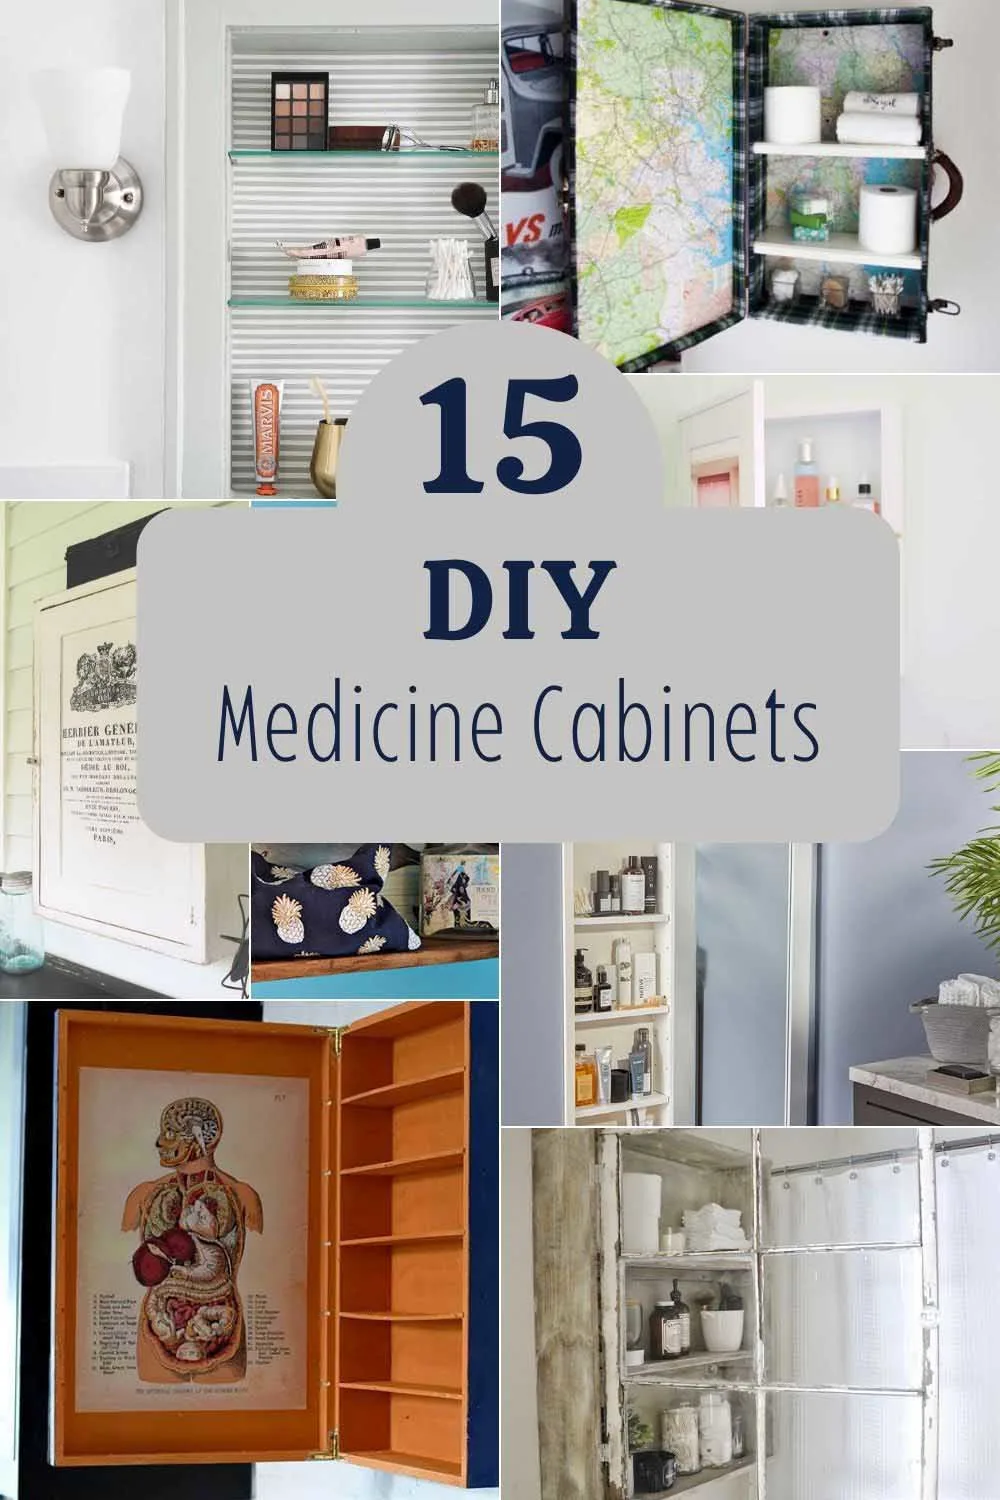 Replaced old medicine cabinet with scrap wood. Build in with adjustable  shelves